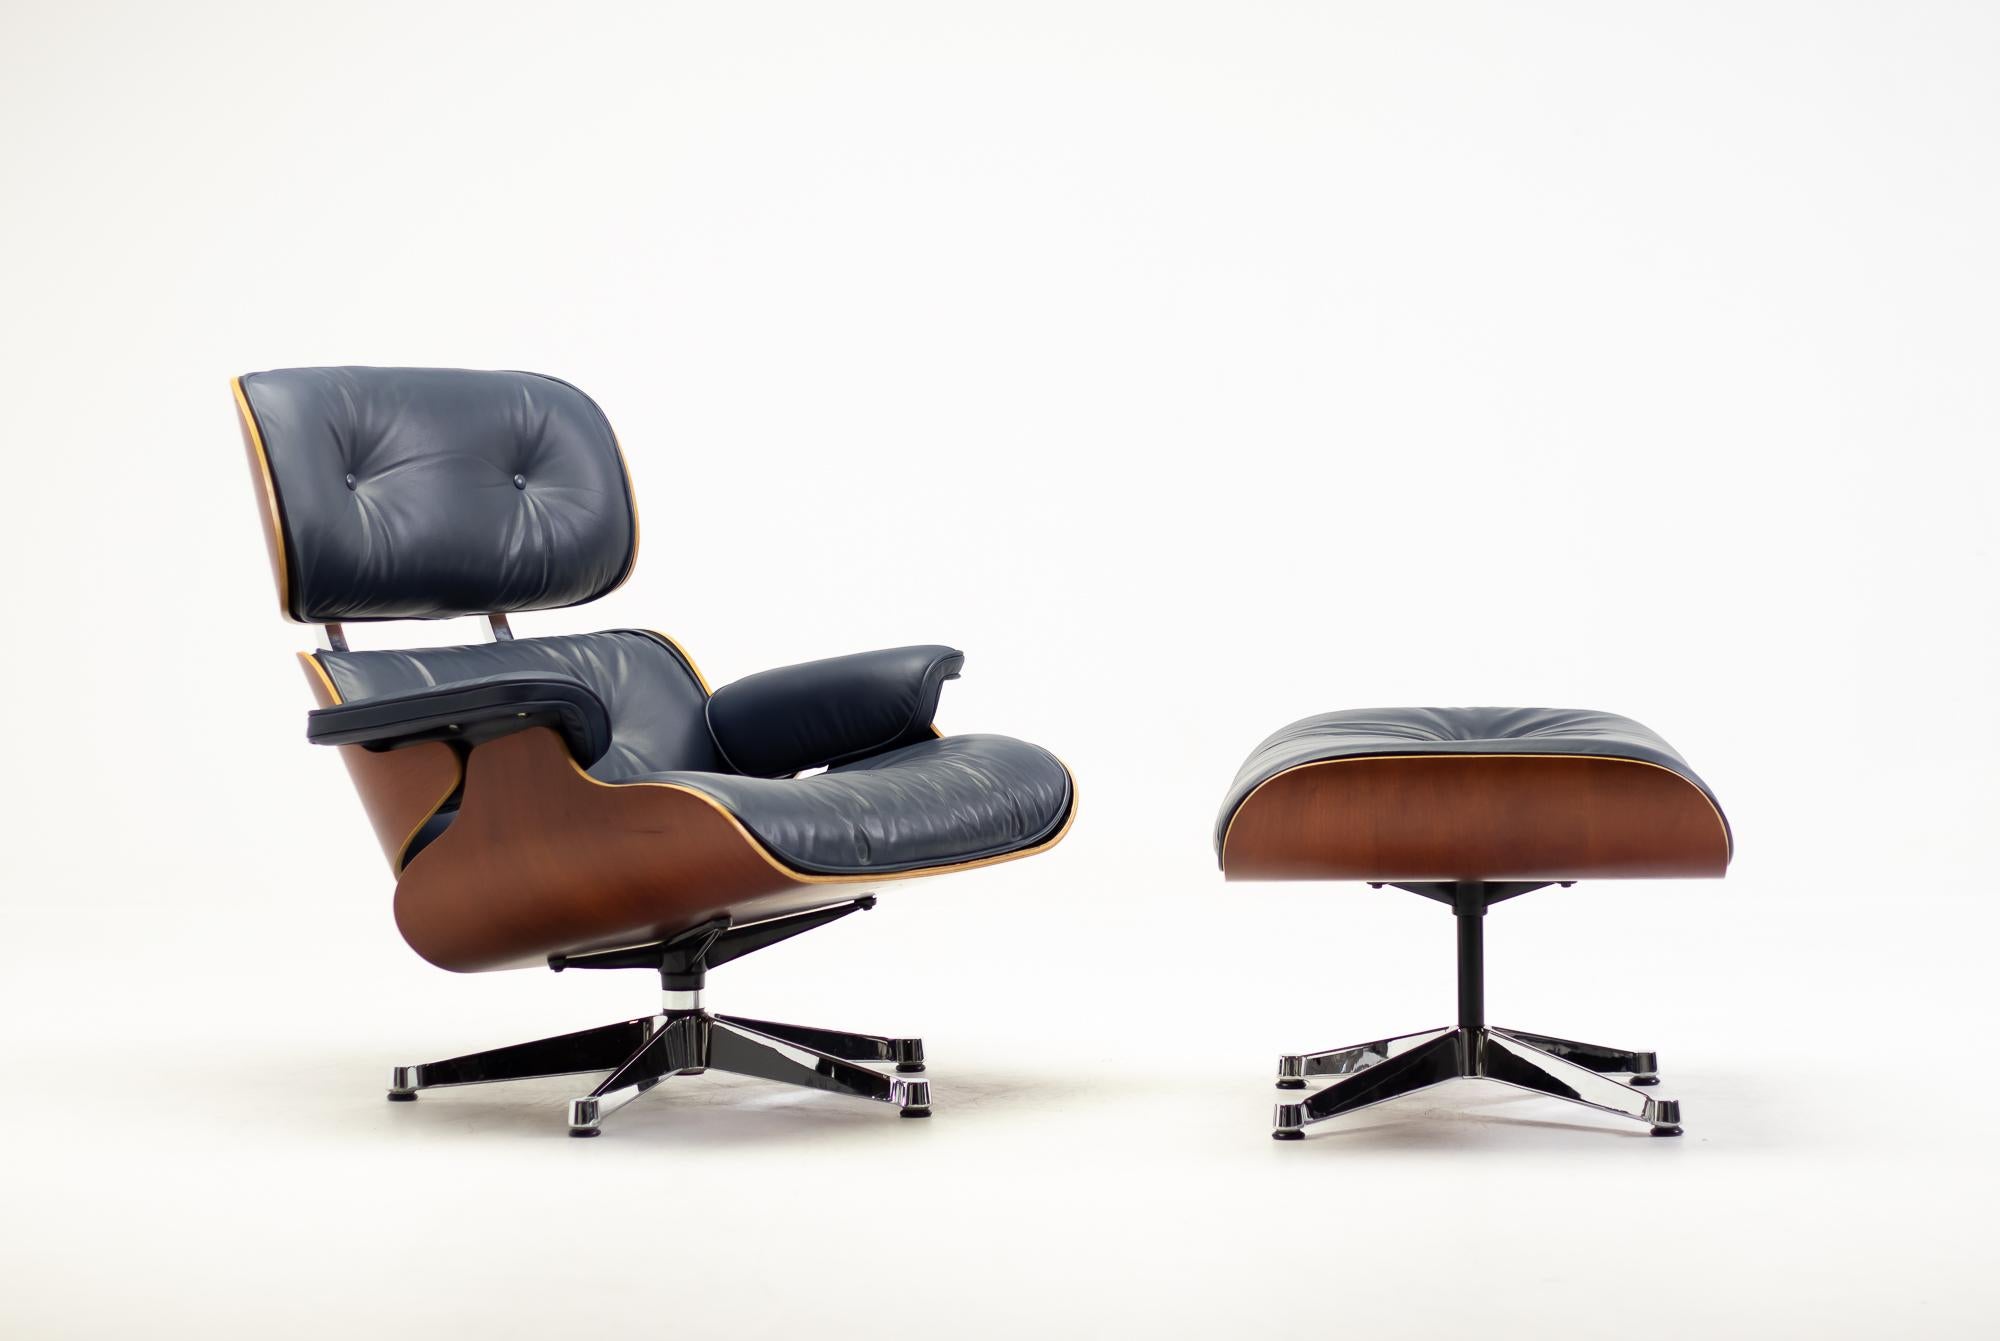 Beautiful lounge chair and ottoman designed by Charles and Ray Eames and manufactured in 2005 by Vitra.
Special edition in dark blue leather with cherry shells and full polished chrome frame.
Marked with label.